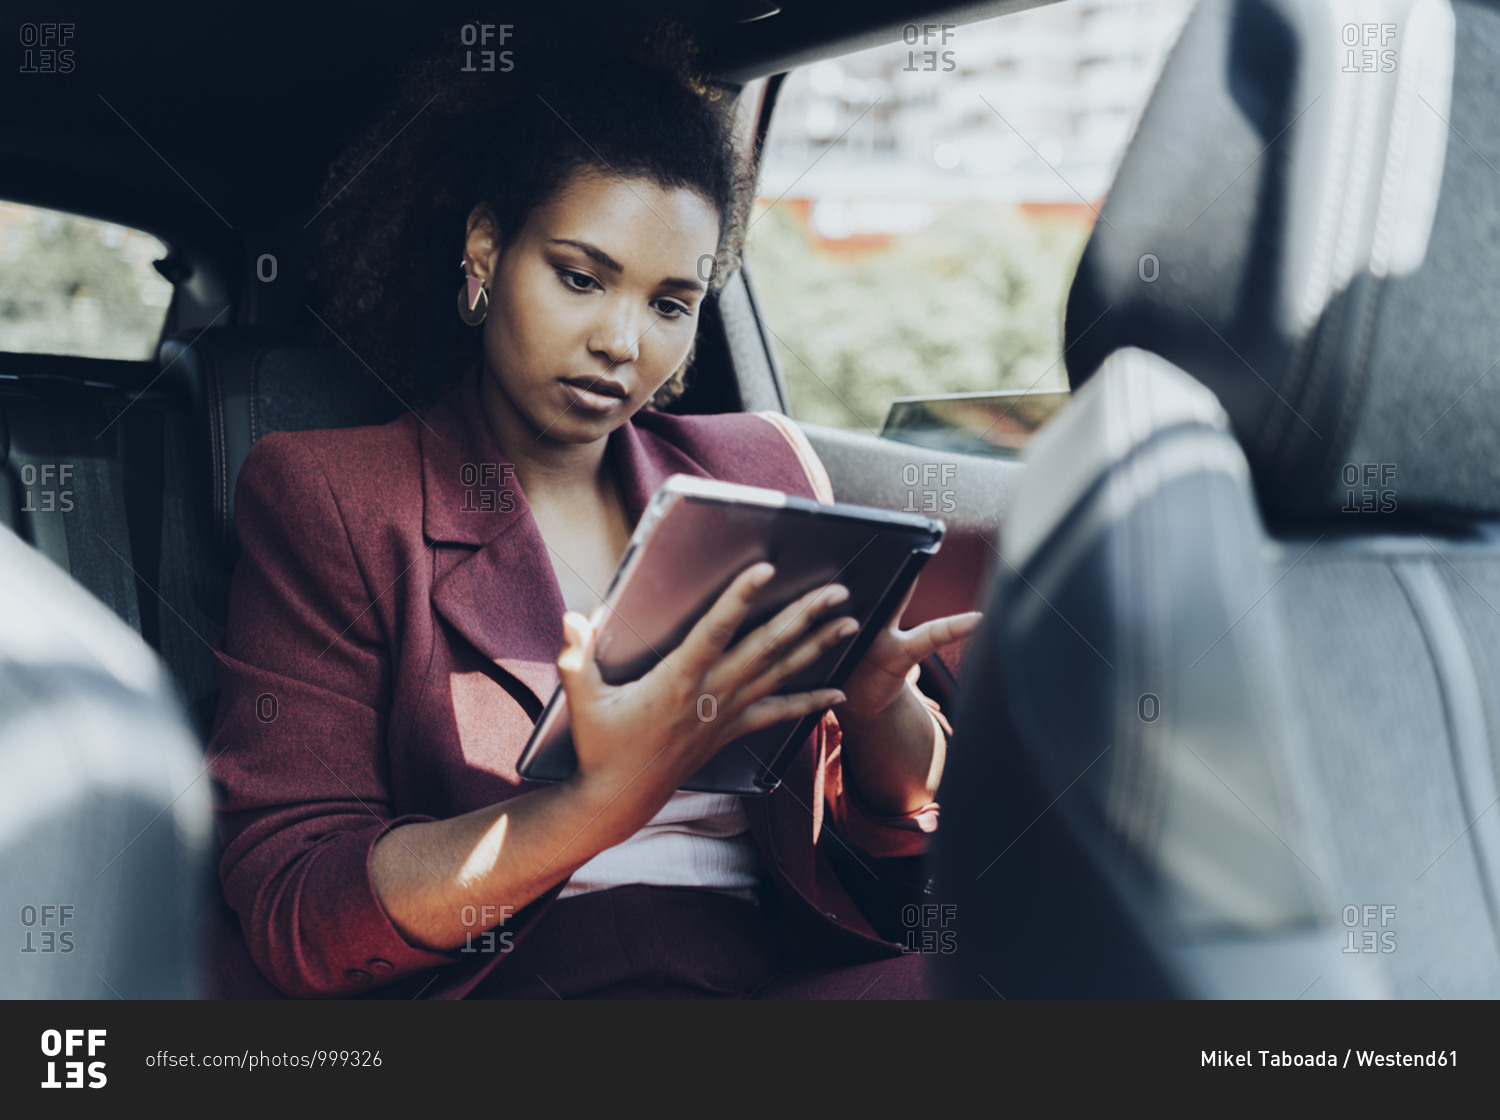 Young female entrepreneur using digital tablet while sitting in car